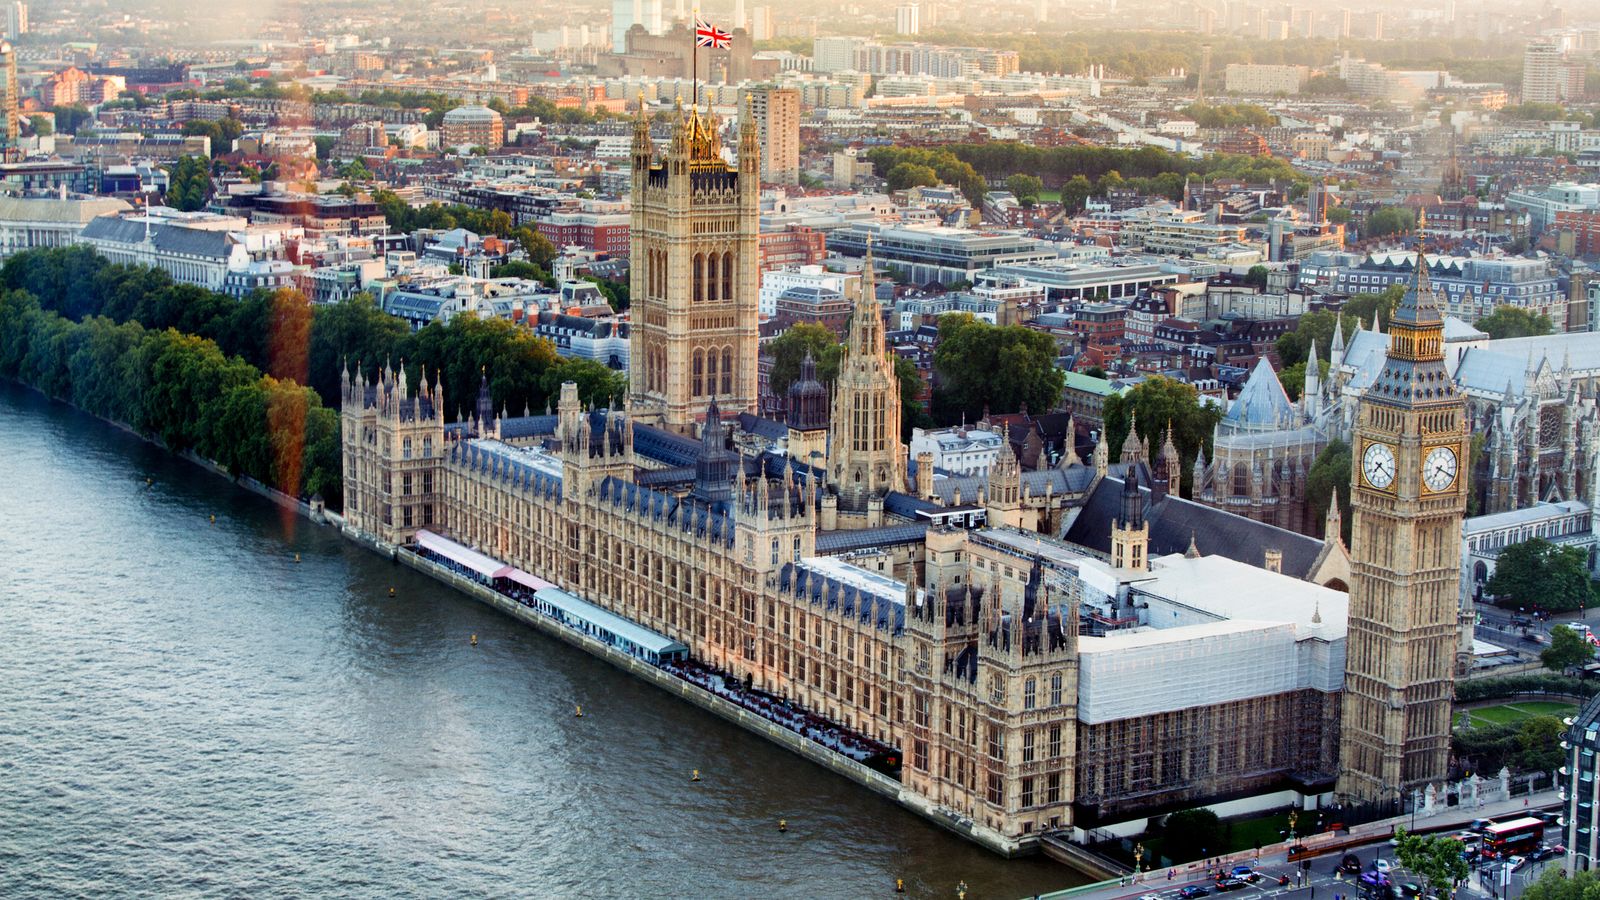 MPs and staff call for parliamentary authorities to urgently tackle abuse in Westminster